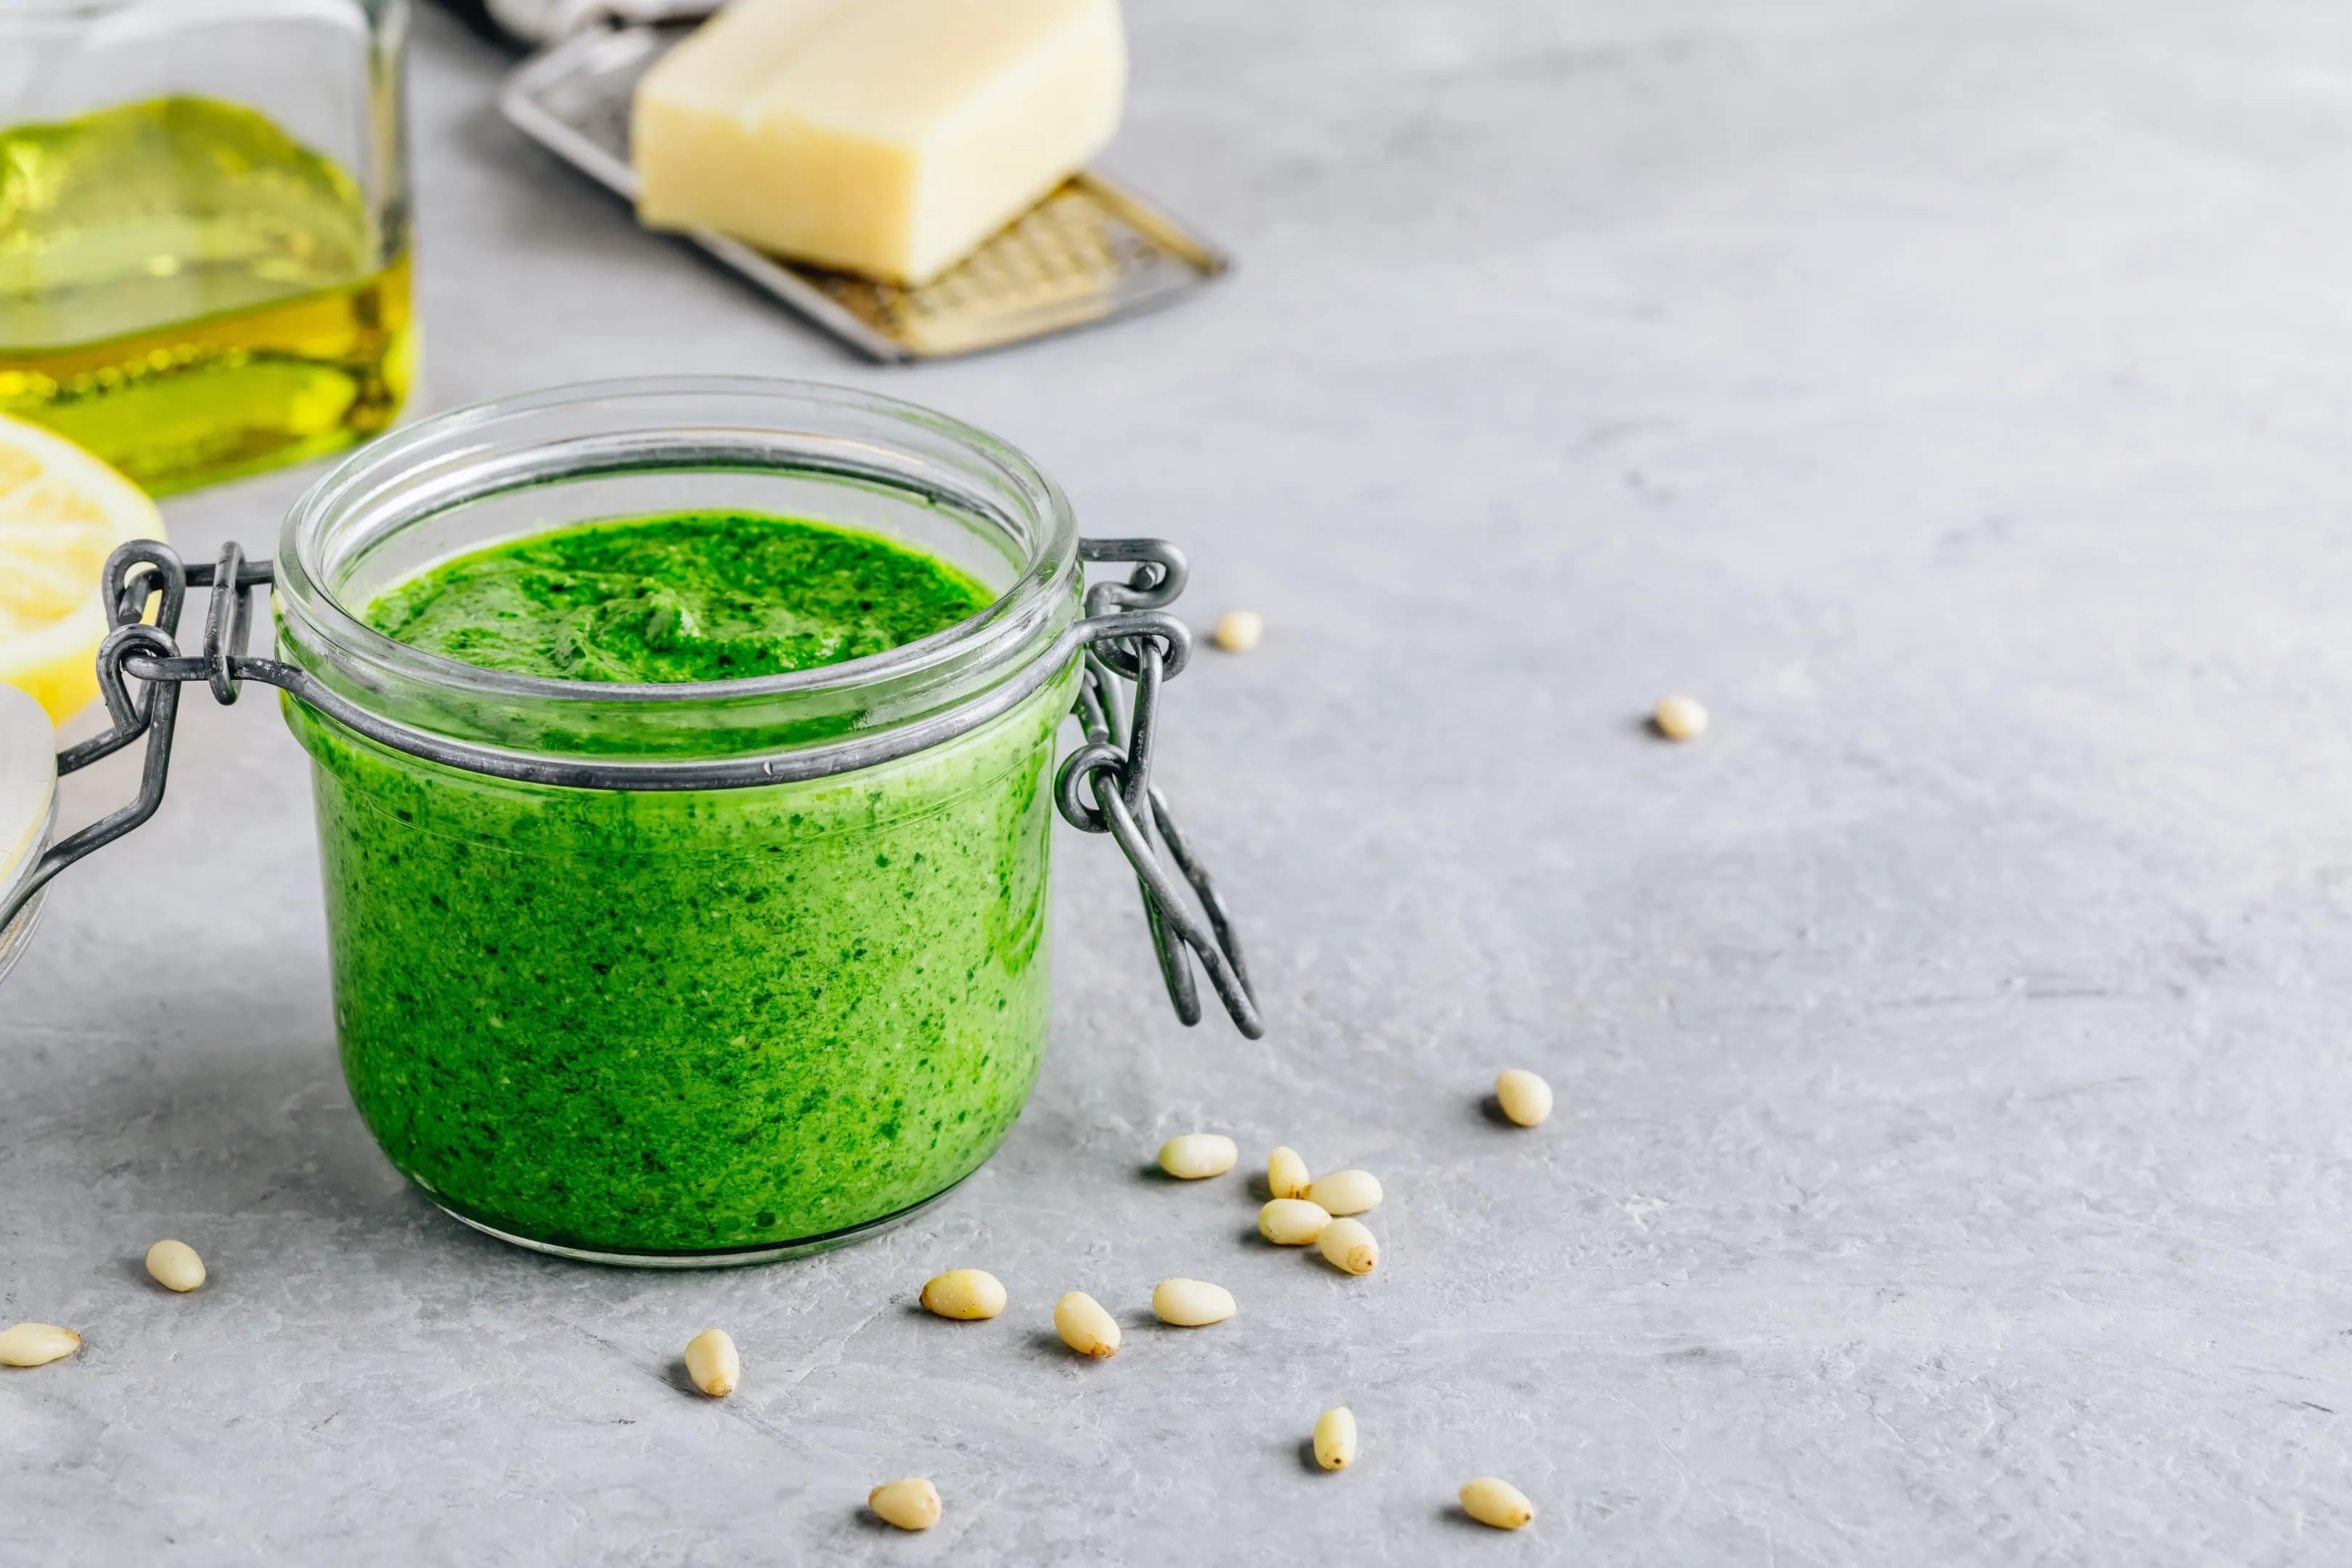 Homemade spinach pesto sauce with parmesan cheese, olive oil, and pine nuts